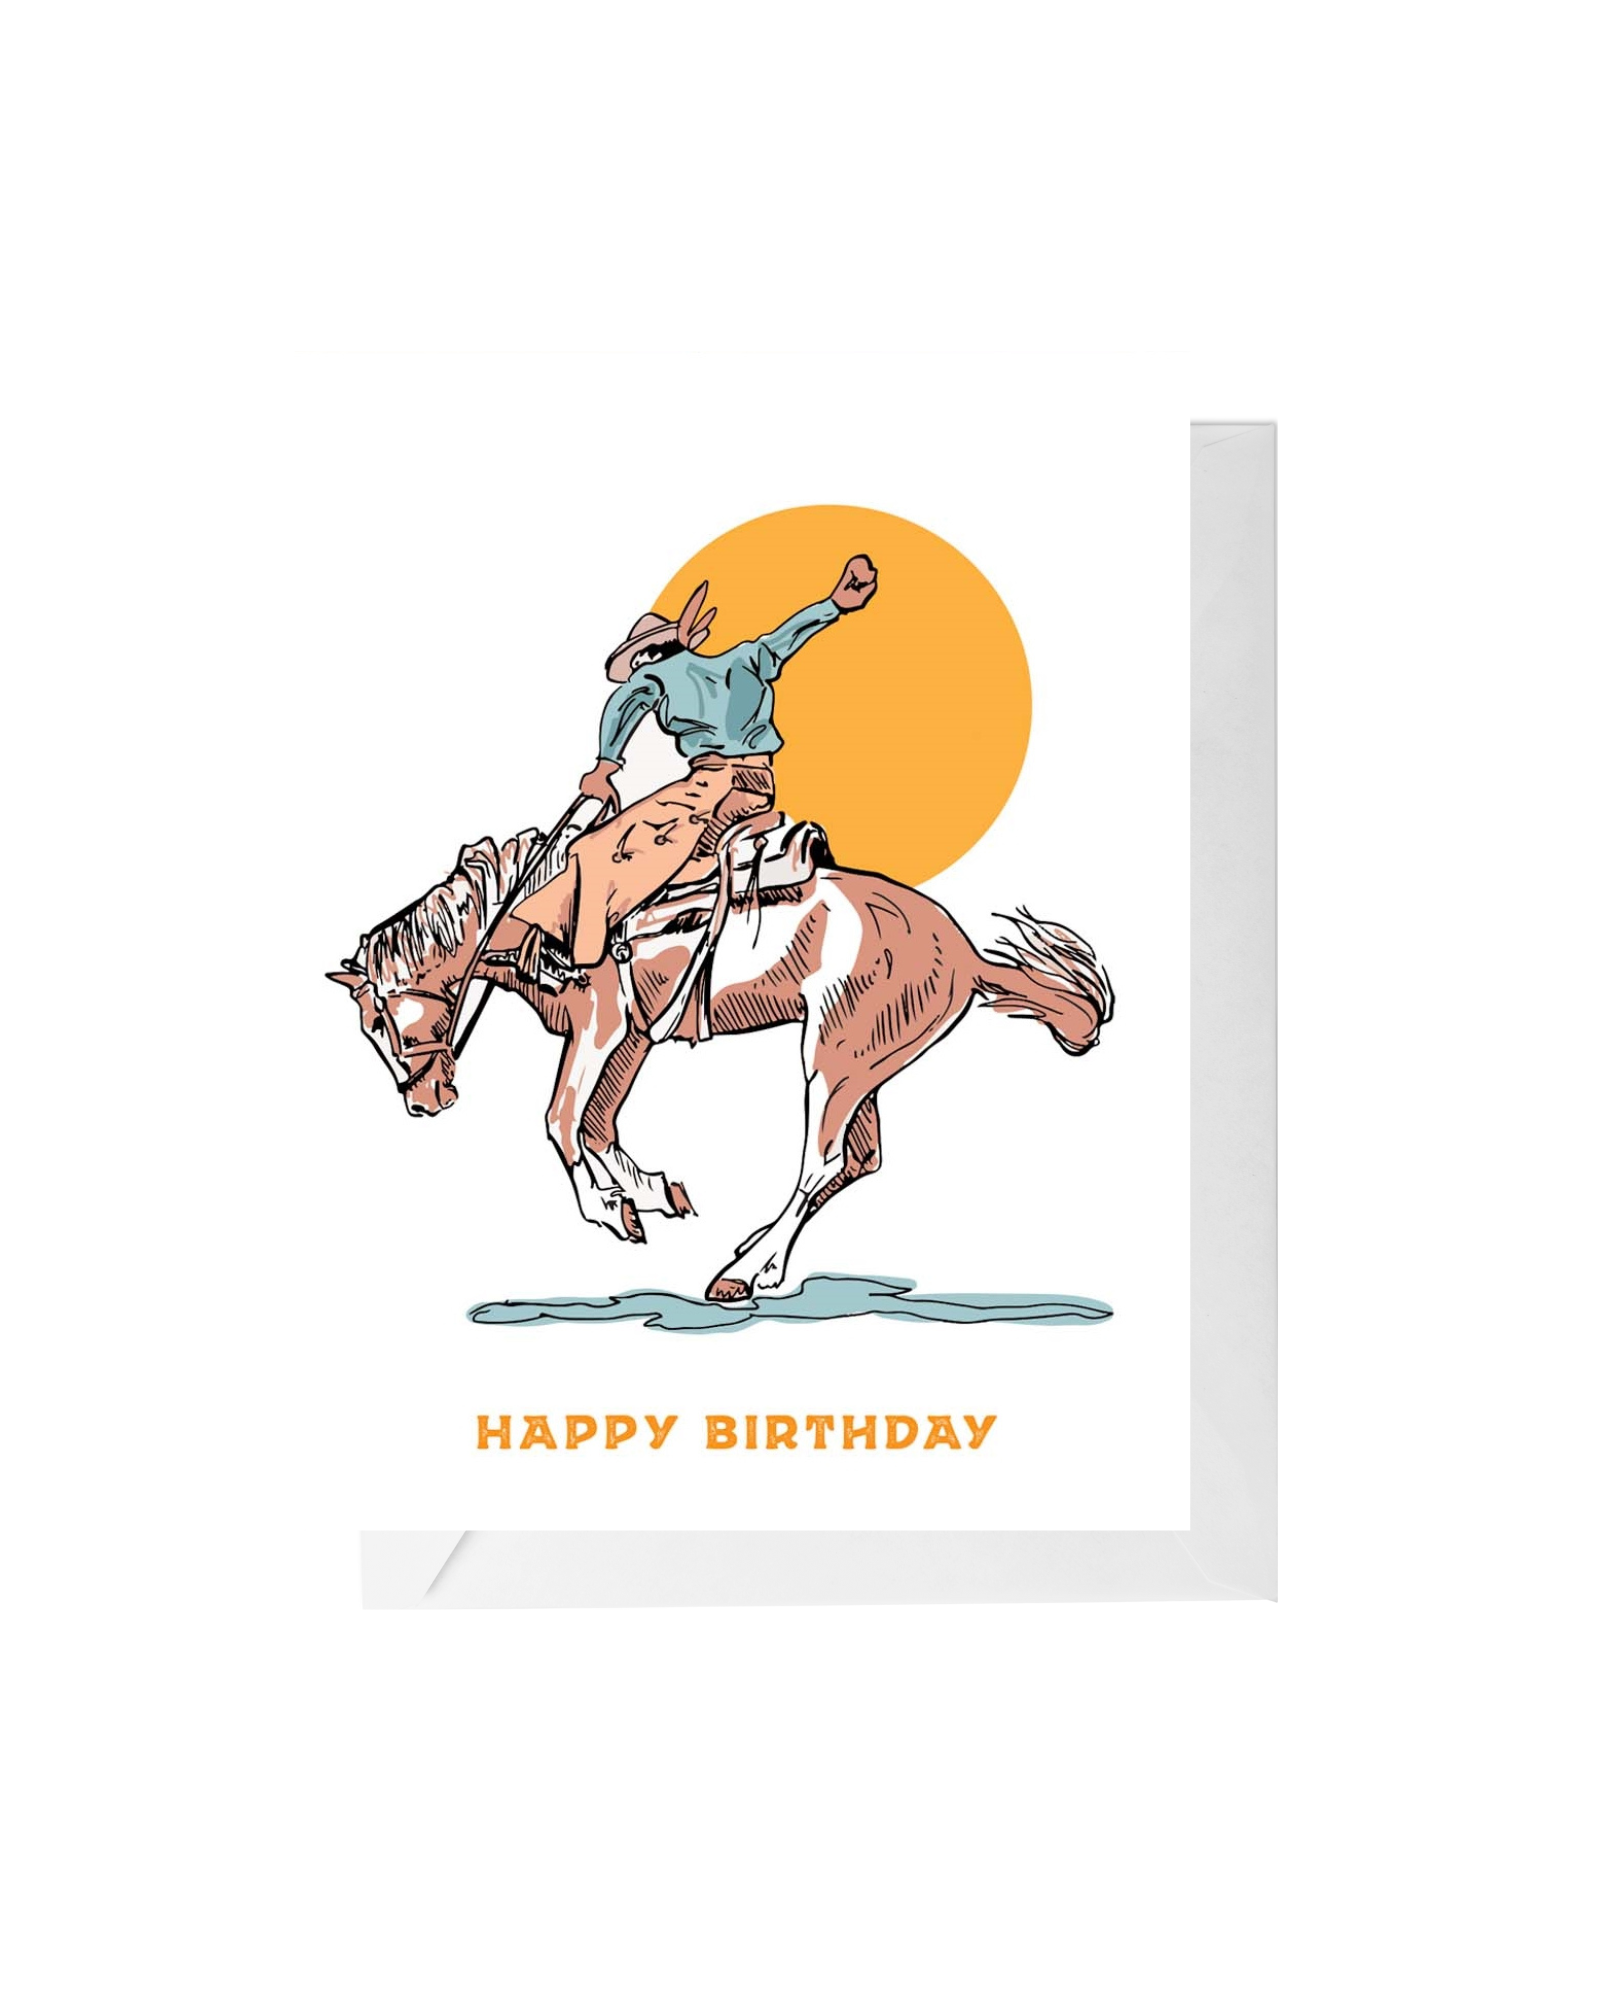 Greeting card and envelope. Illustration of a cowboy on a bucking bronco. Text reads "happy birthday". 